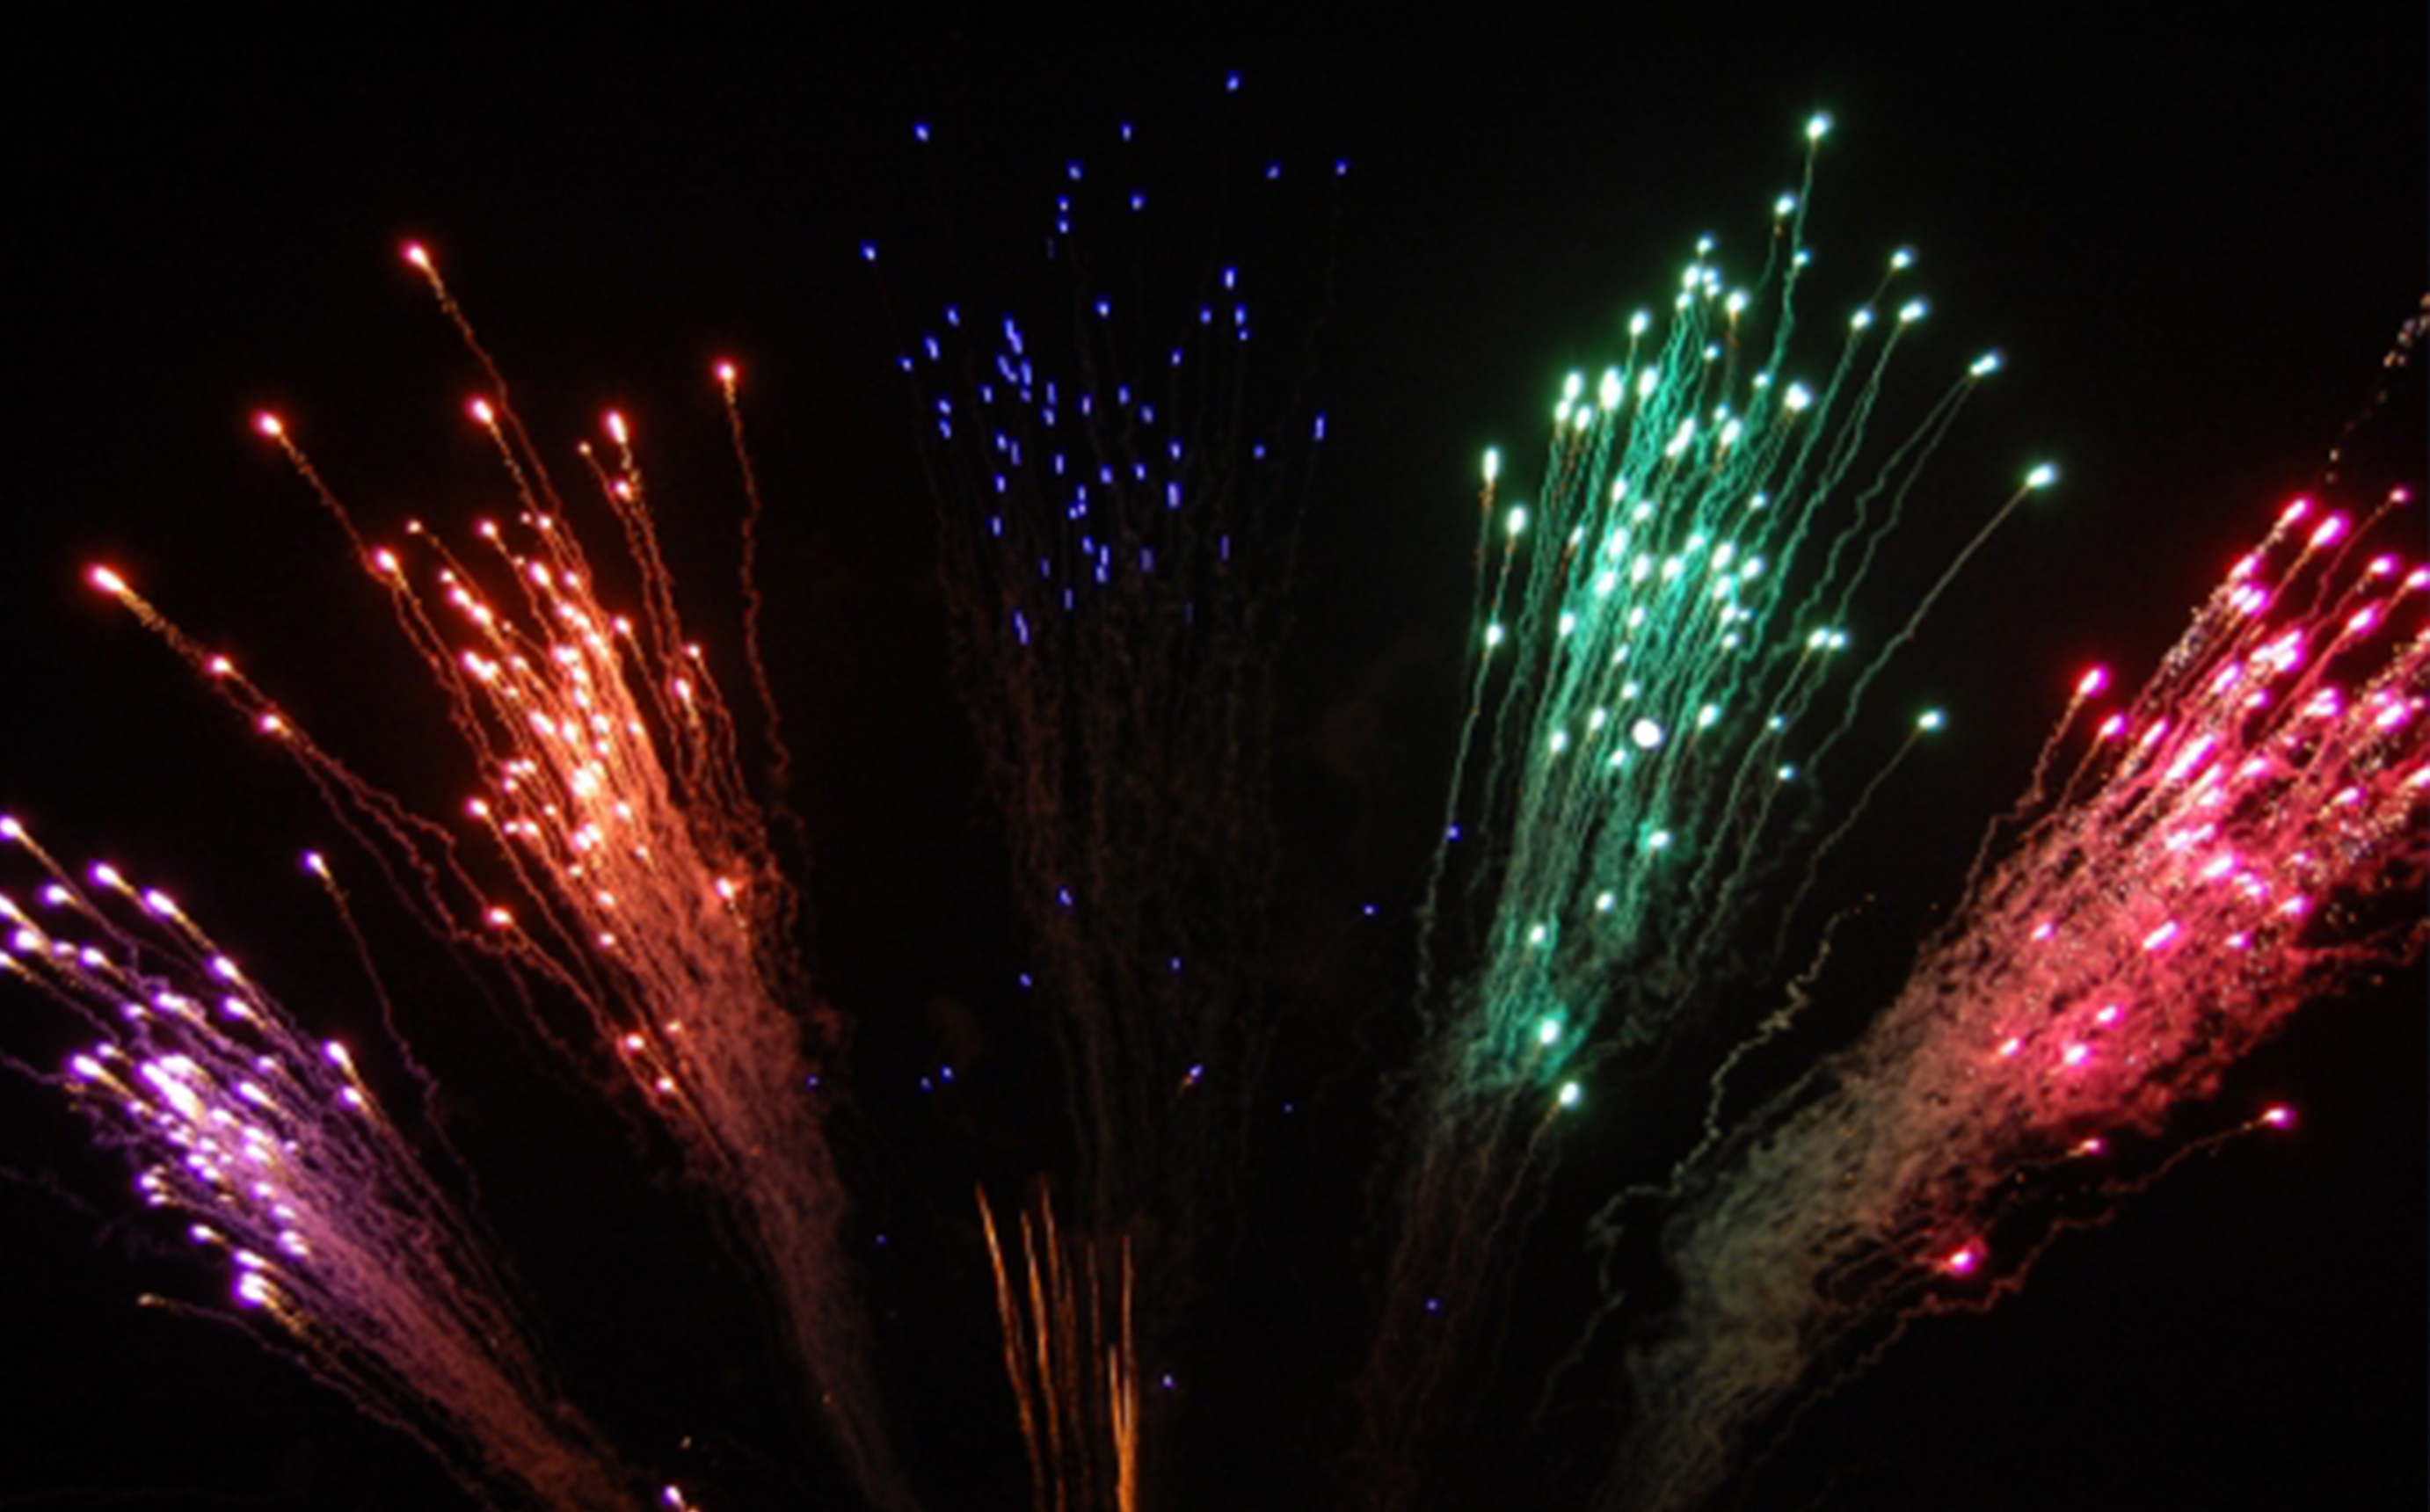 A Fireworks Solutions Limited display, with a multi-coloured fireworks